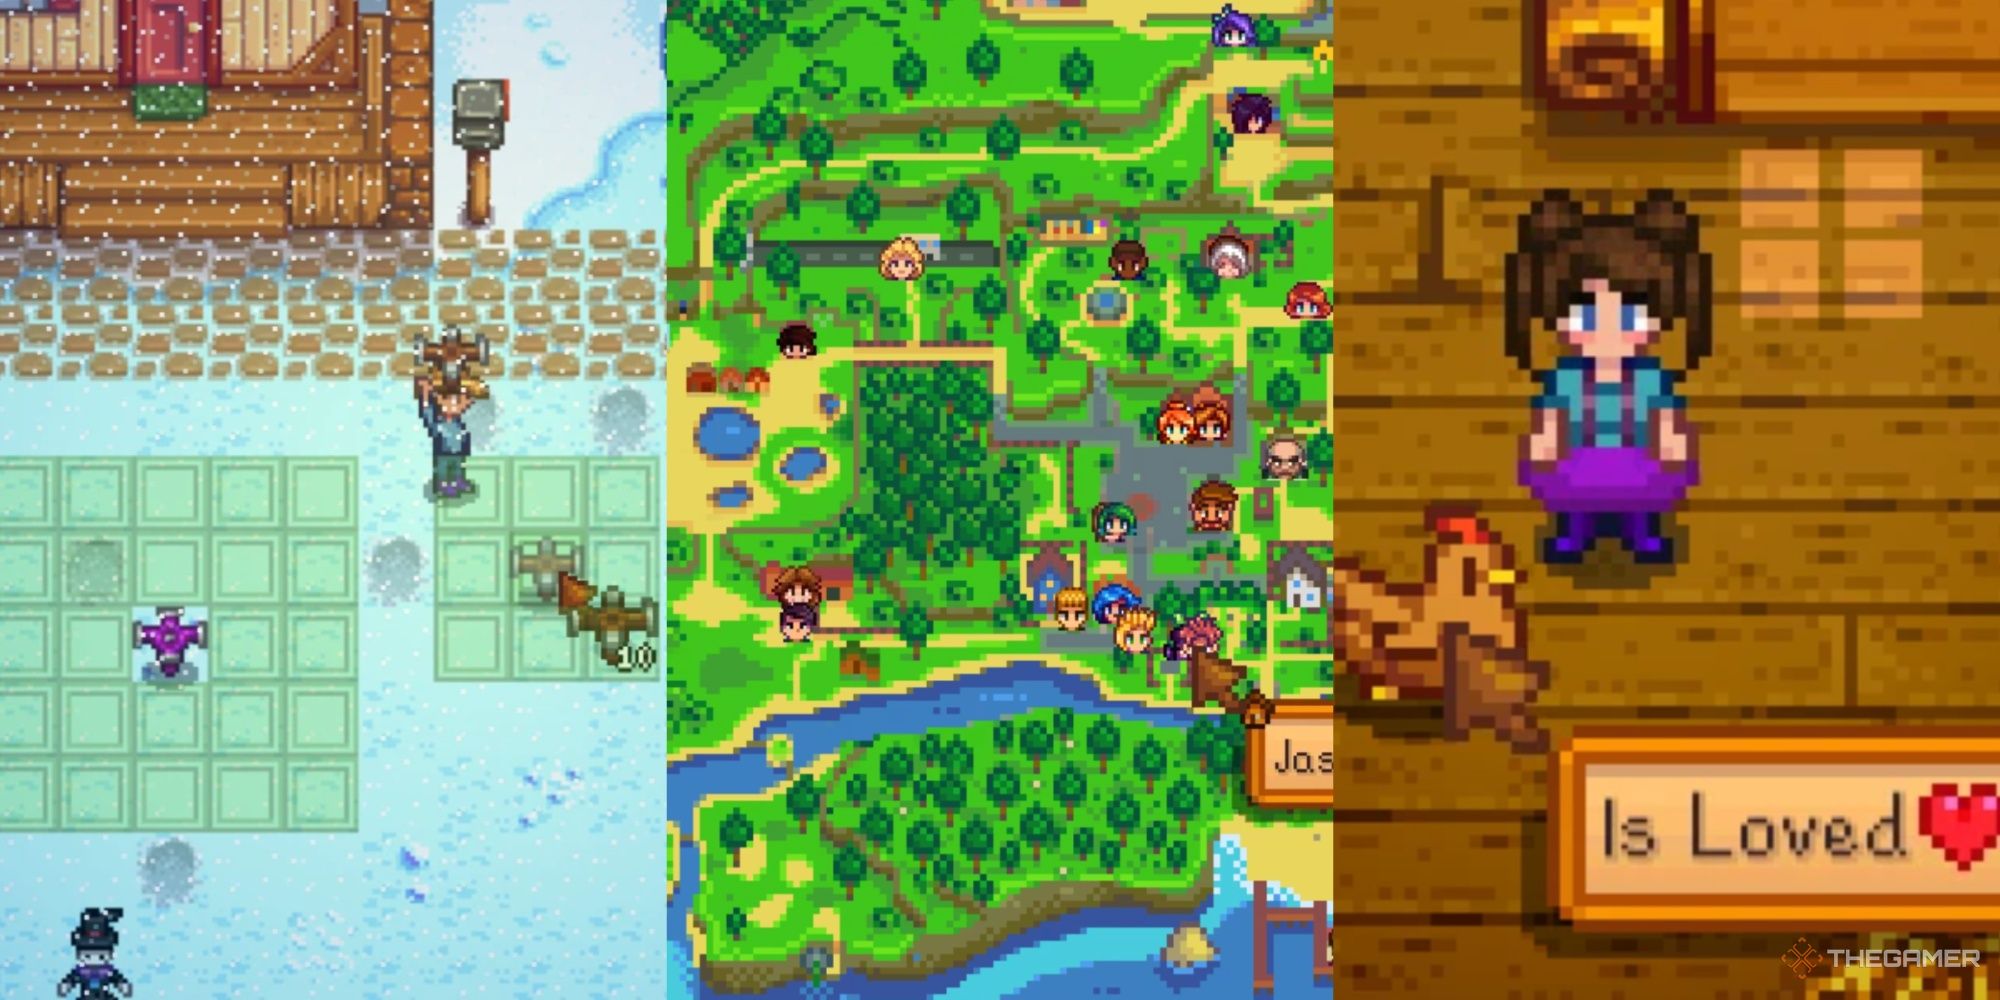 10 Coolest New Items From The Stardew Valley 1.6 Update, Ranked